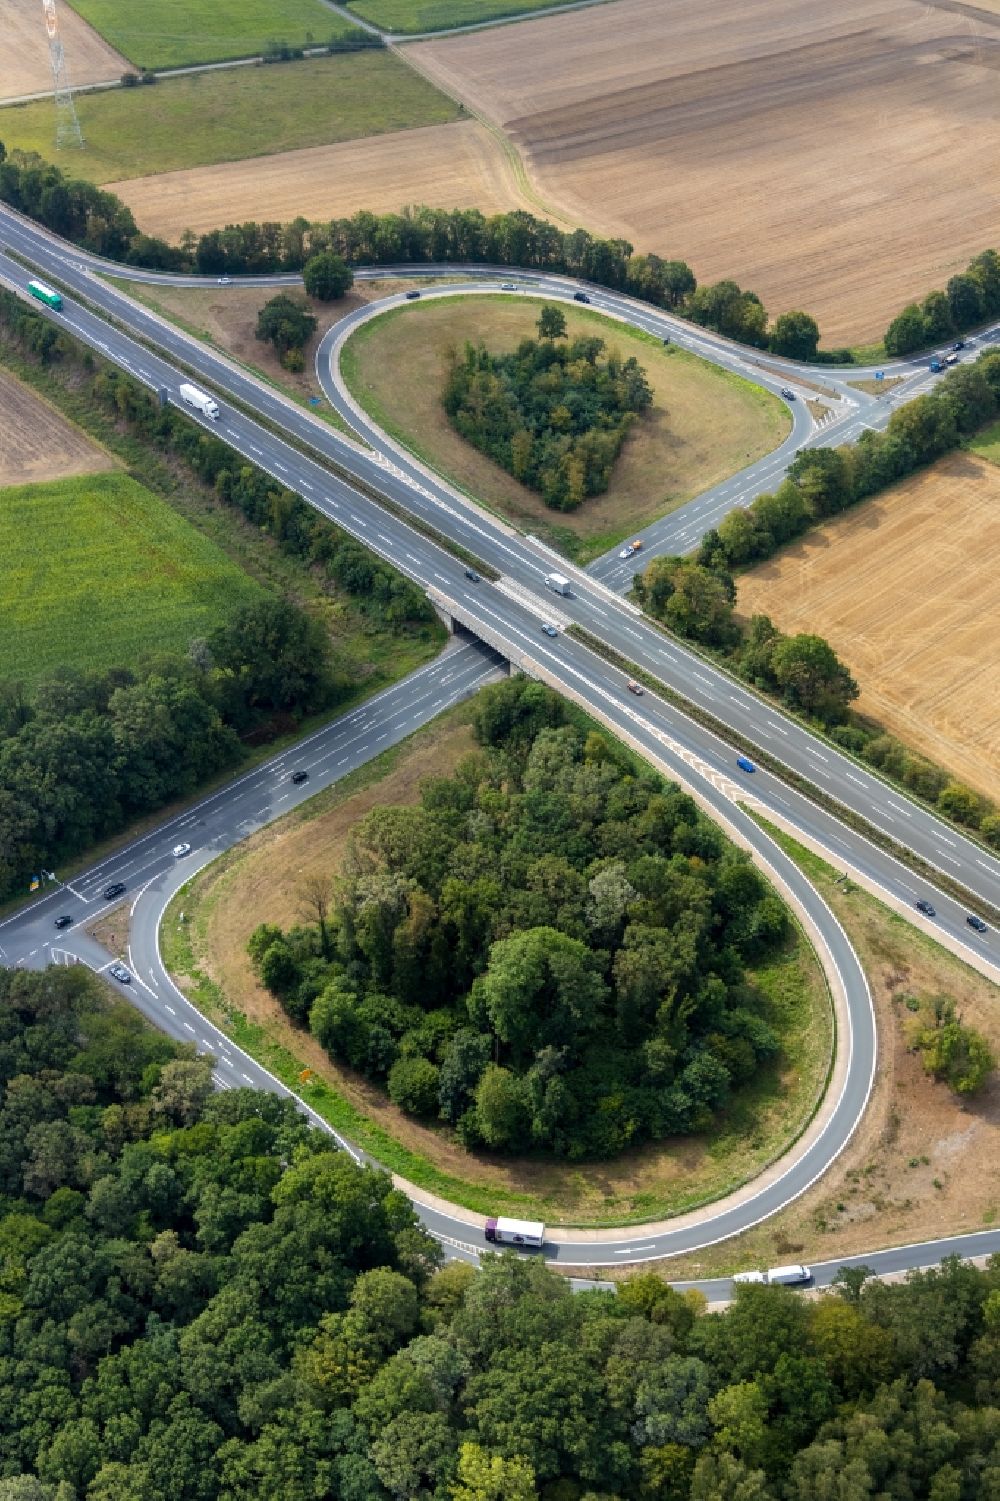 Werne from above - Routing and traffic lanes during the highway exit and access the motorway A 1 at the Nordlippestrasse in Werne in the state North Rhine-Westphalia, Germany